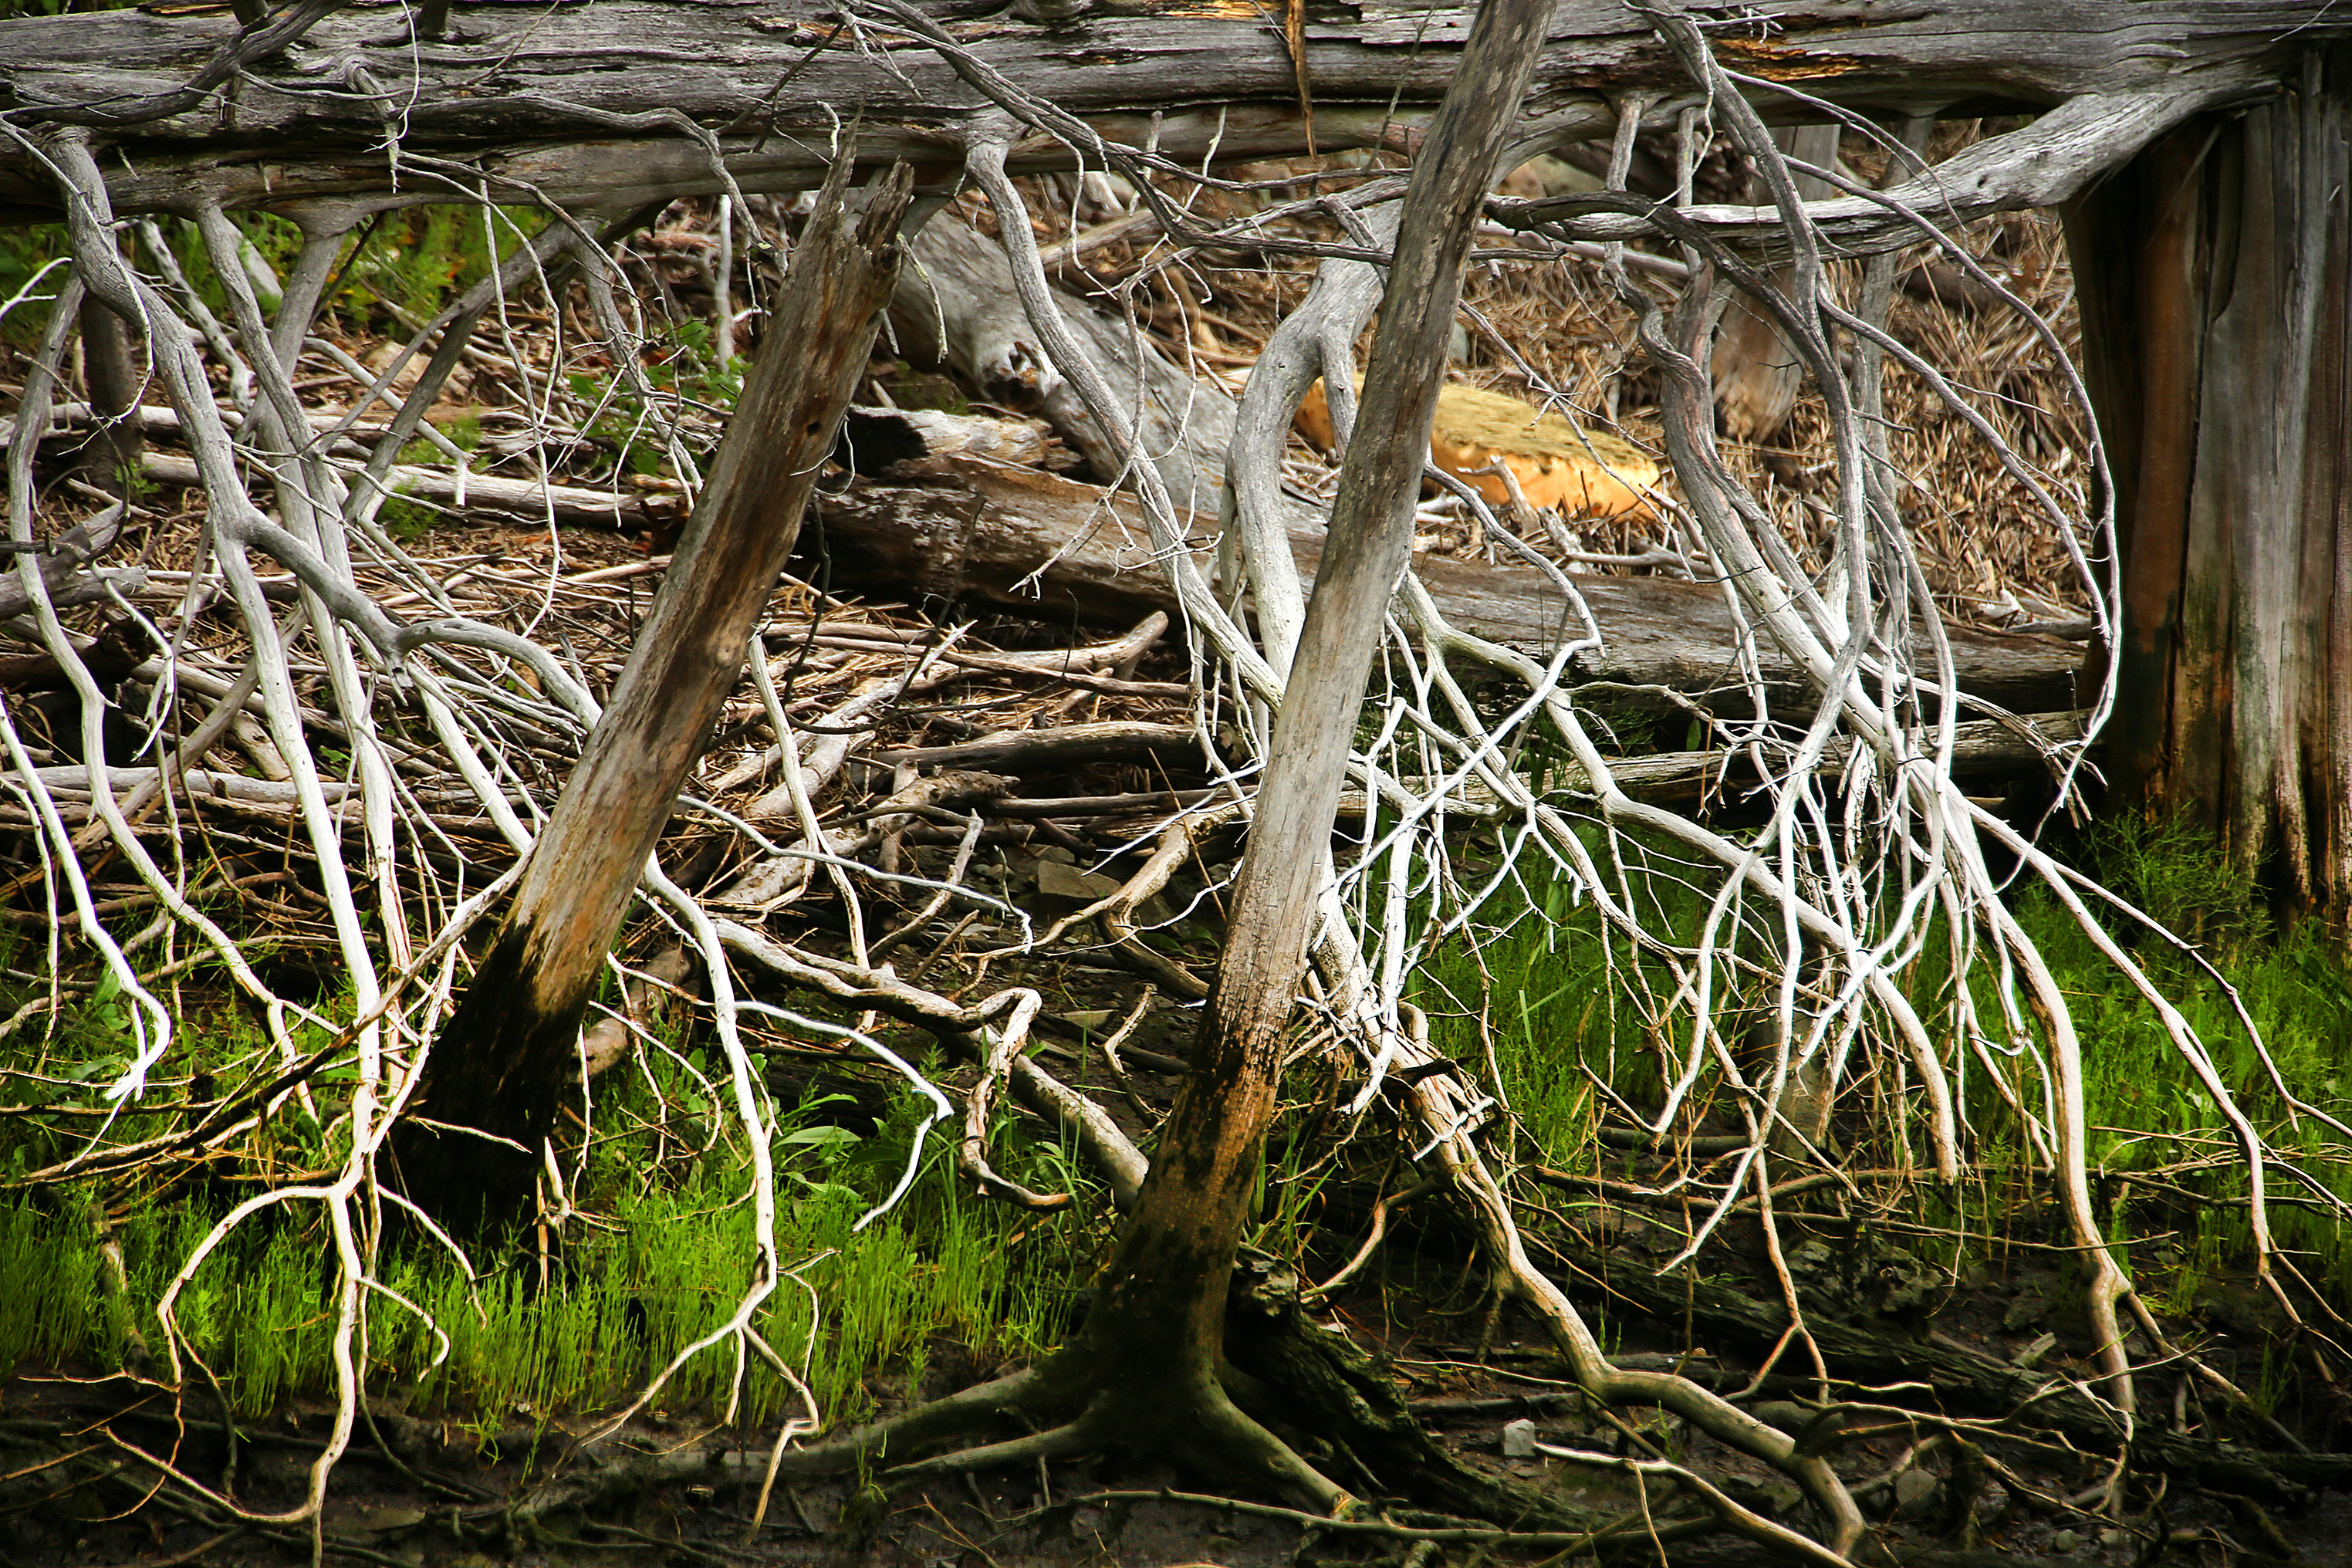 Tree roots form a pattern along Land's End shoreline.